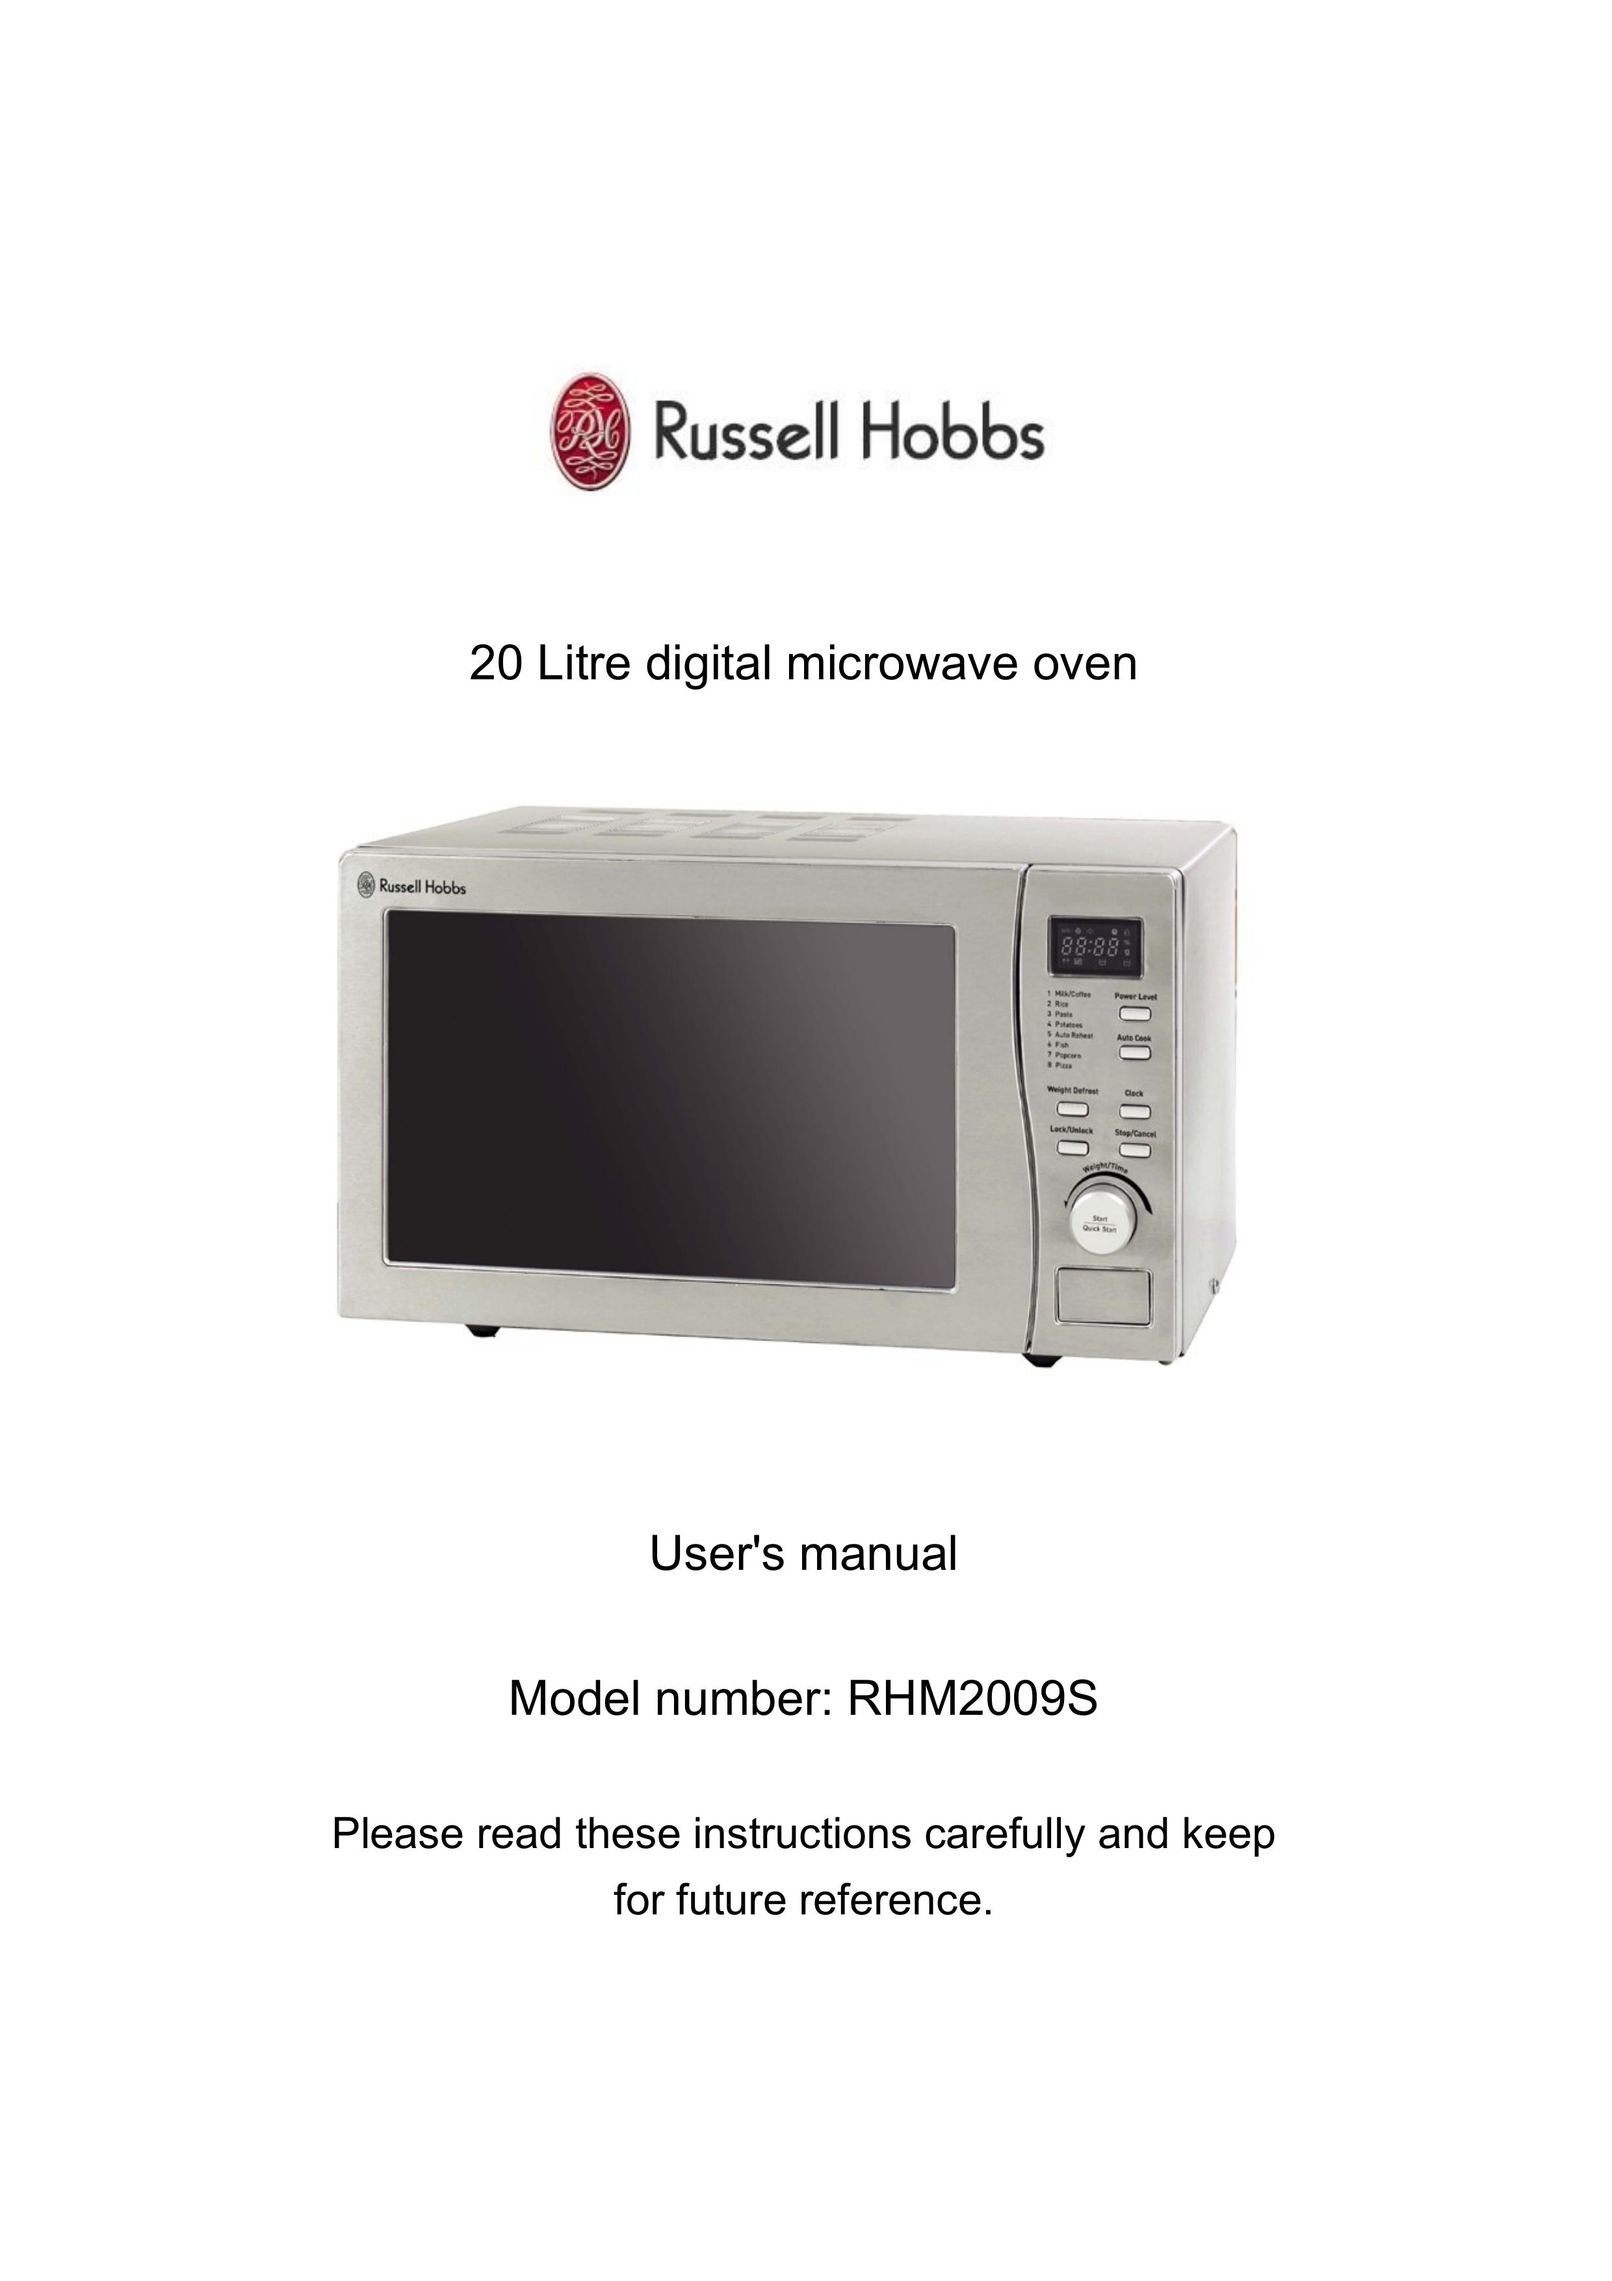 Russell Hobbs RHM2009S Microwave Oven User Manual